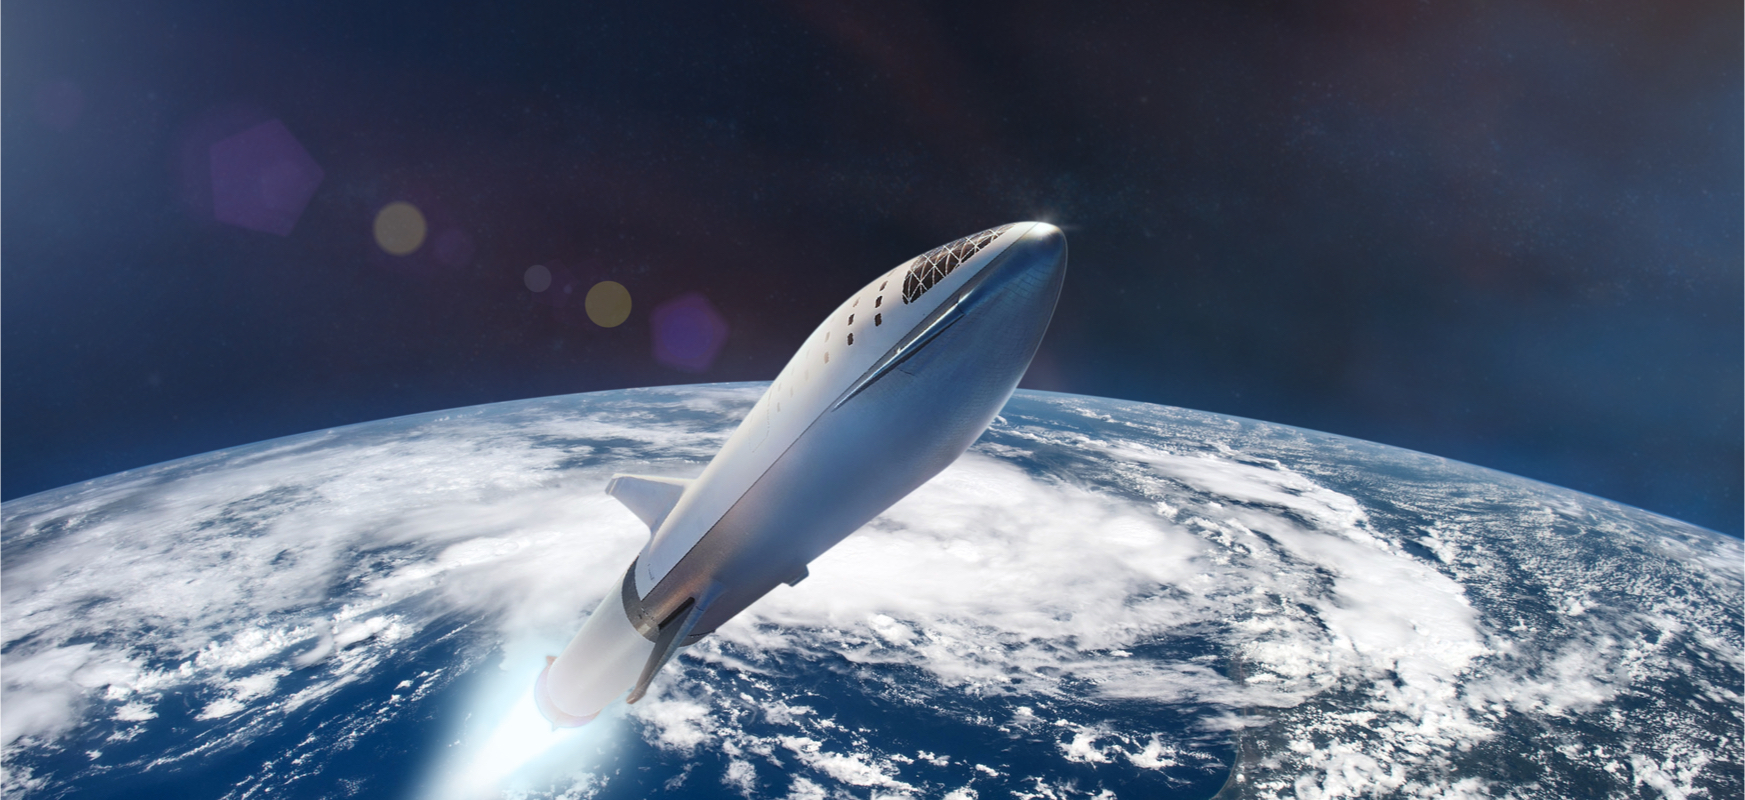 The Starship will be ready to fly into orbit in a few weeks.  It's a pity it won't fly